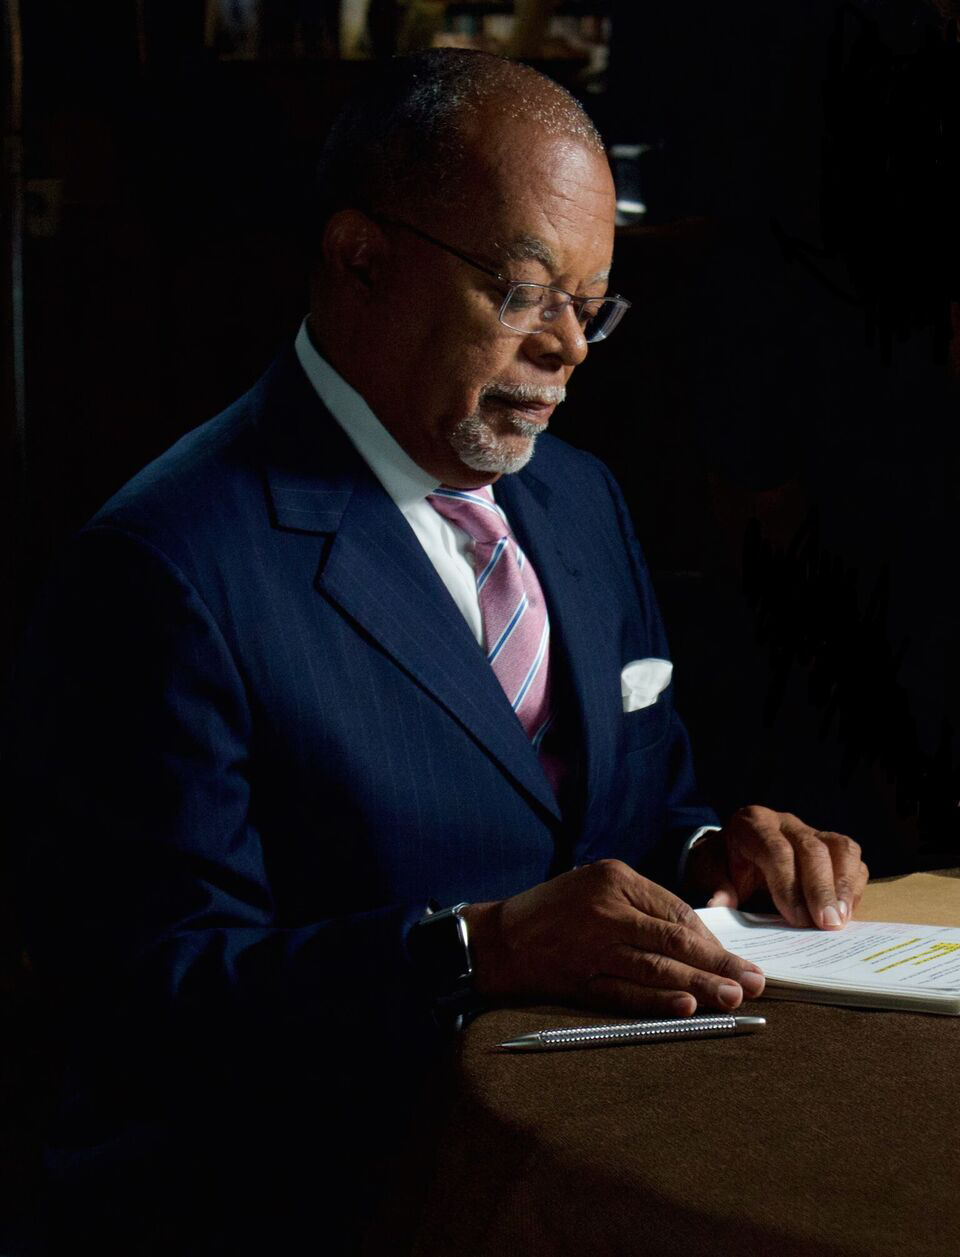 In an interview with Family Tree Magazine, Henry Louis Gates, Jr, shared some reflections about his genealogical journey—and a sneak peek at "Finding Your Roots," season five.